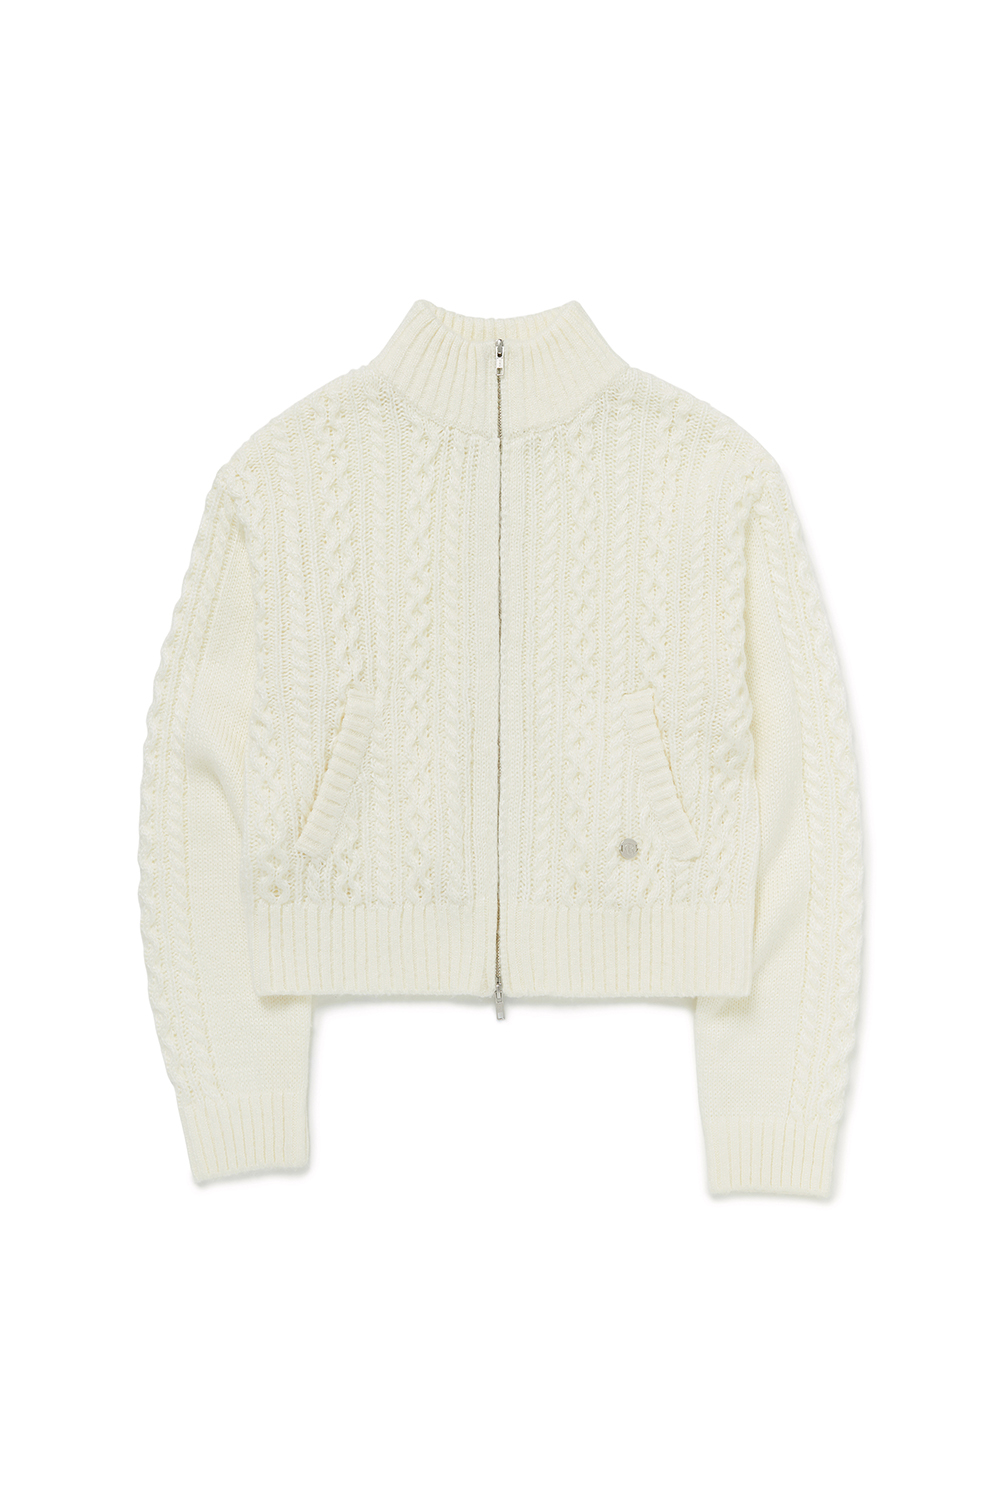 TWISTED KNIT ZIP-UP [IVORY]		